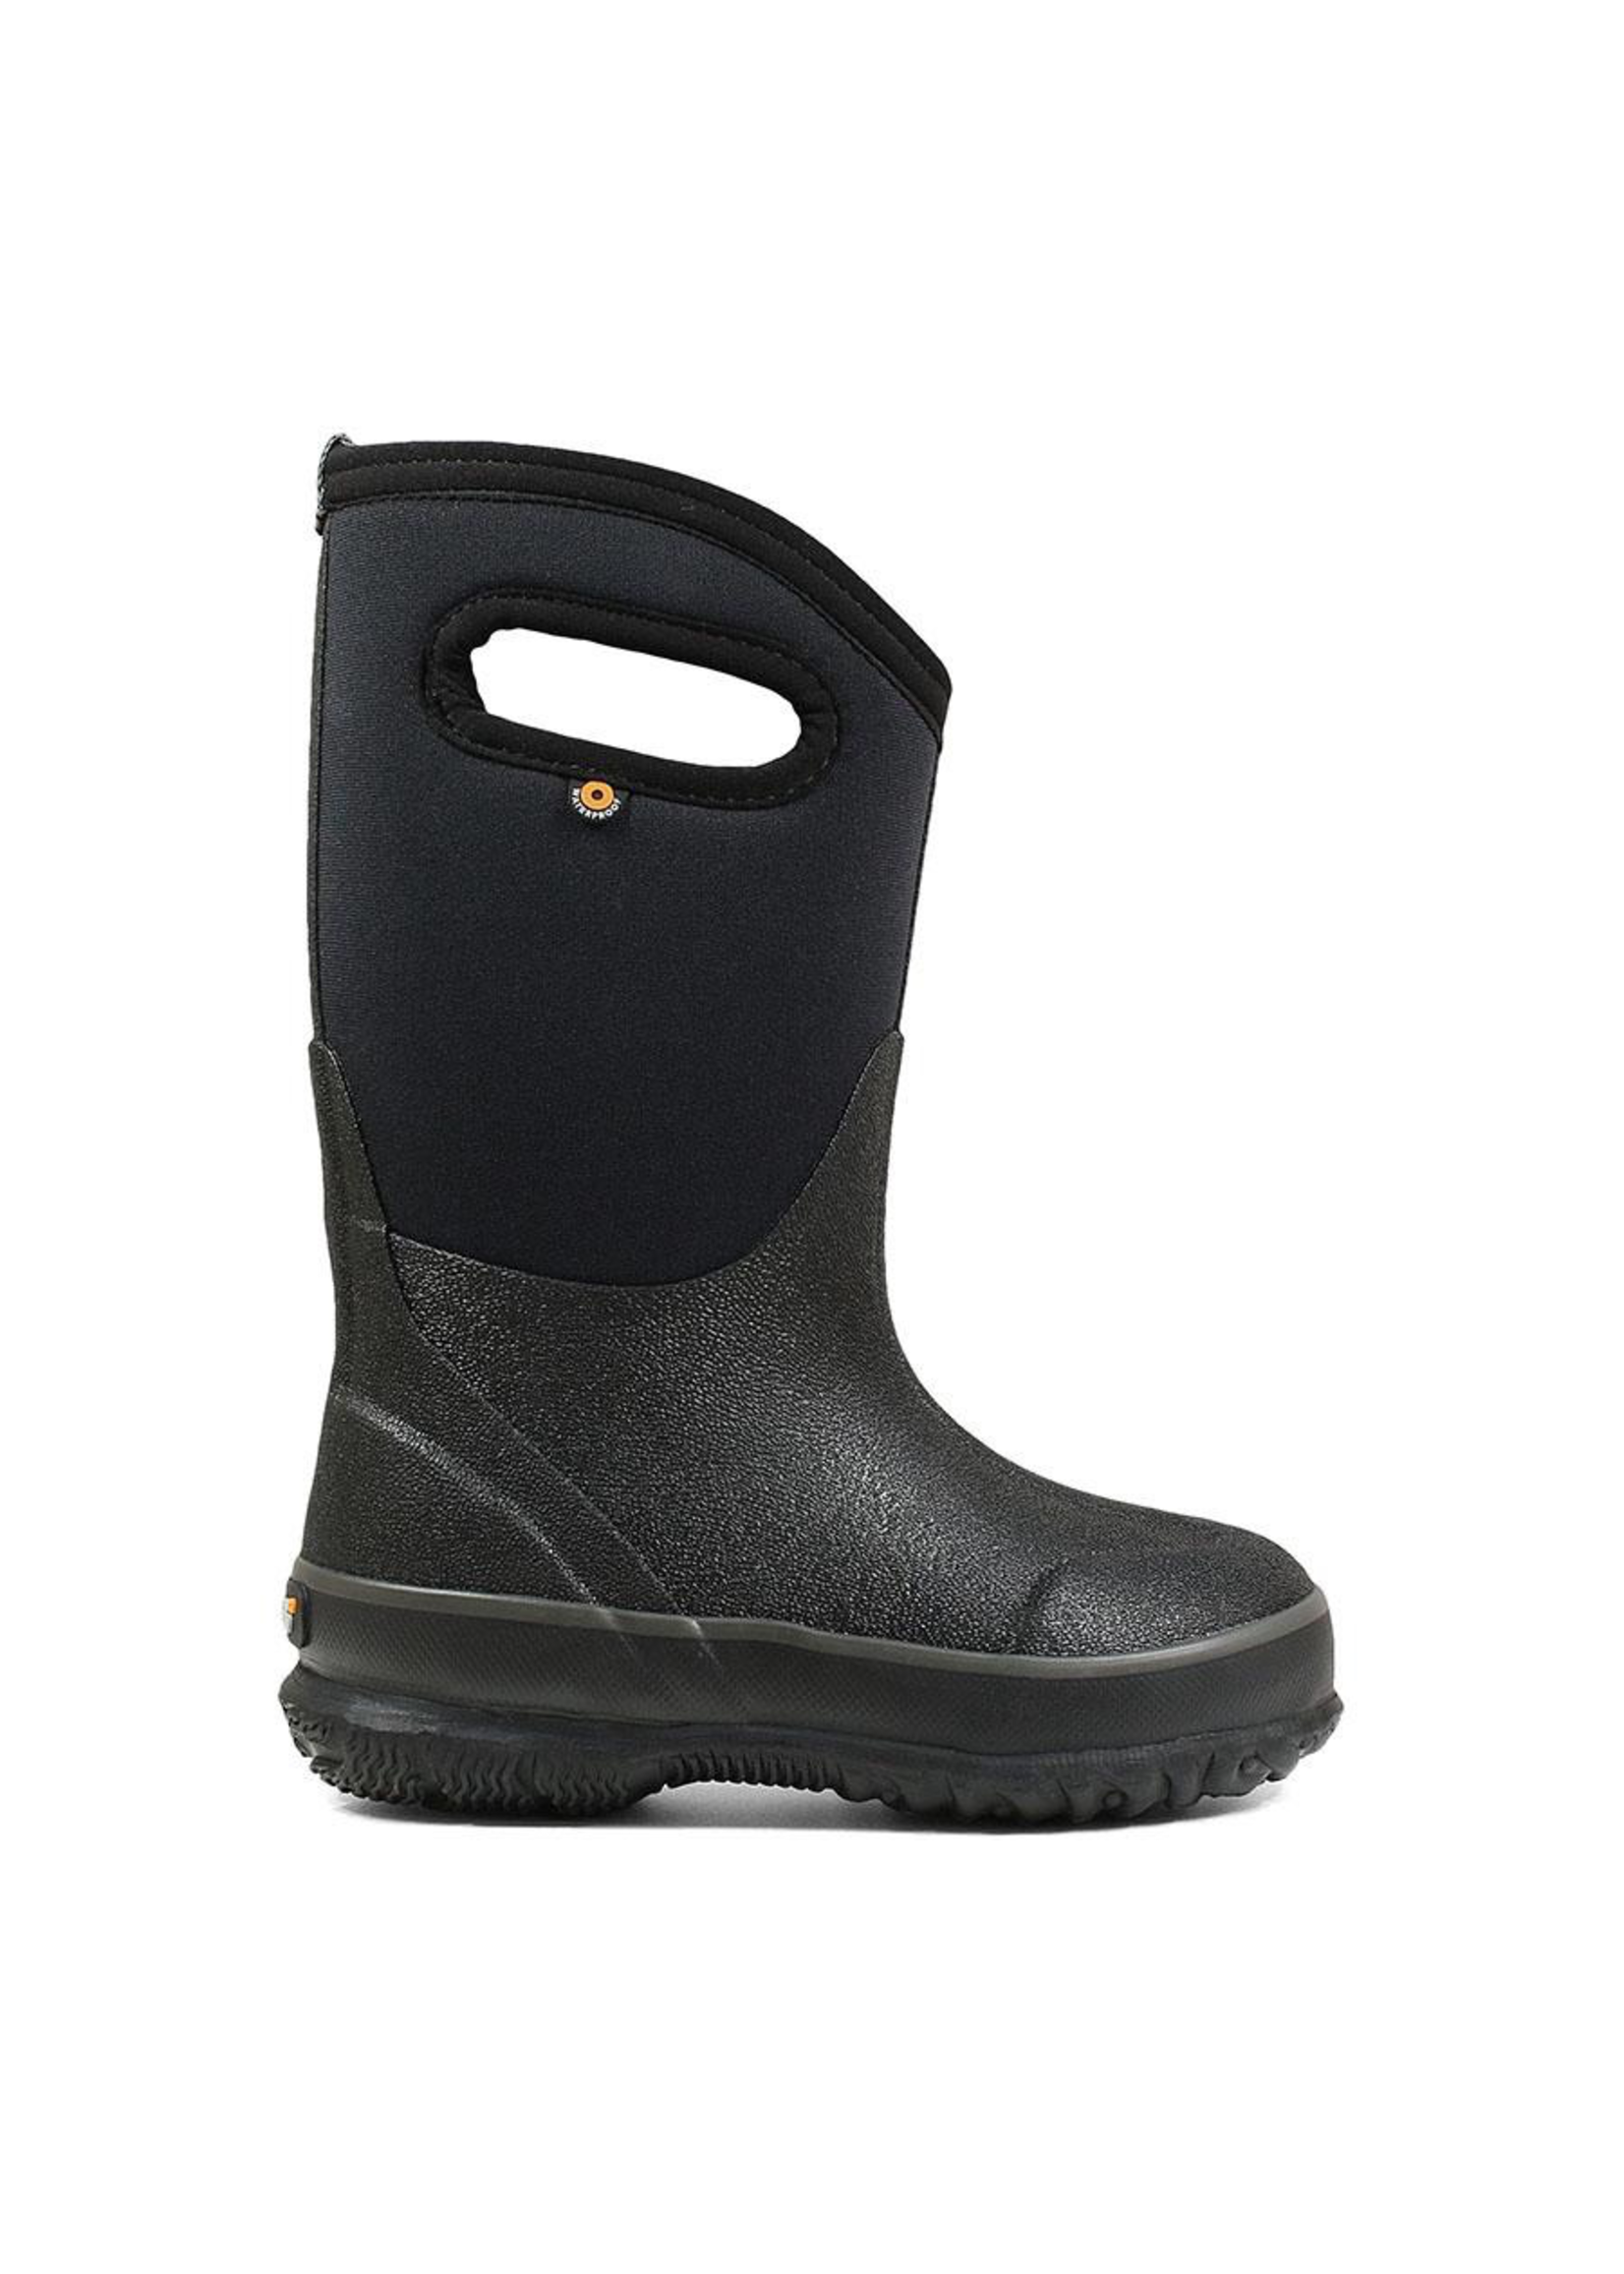 Bogs Bogs, Kids’ Classic Solid Insulated Boots